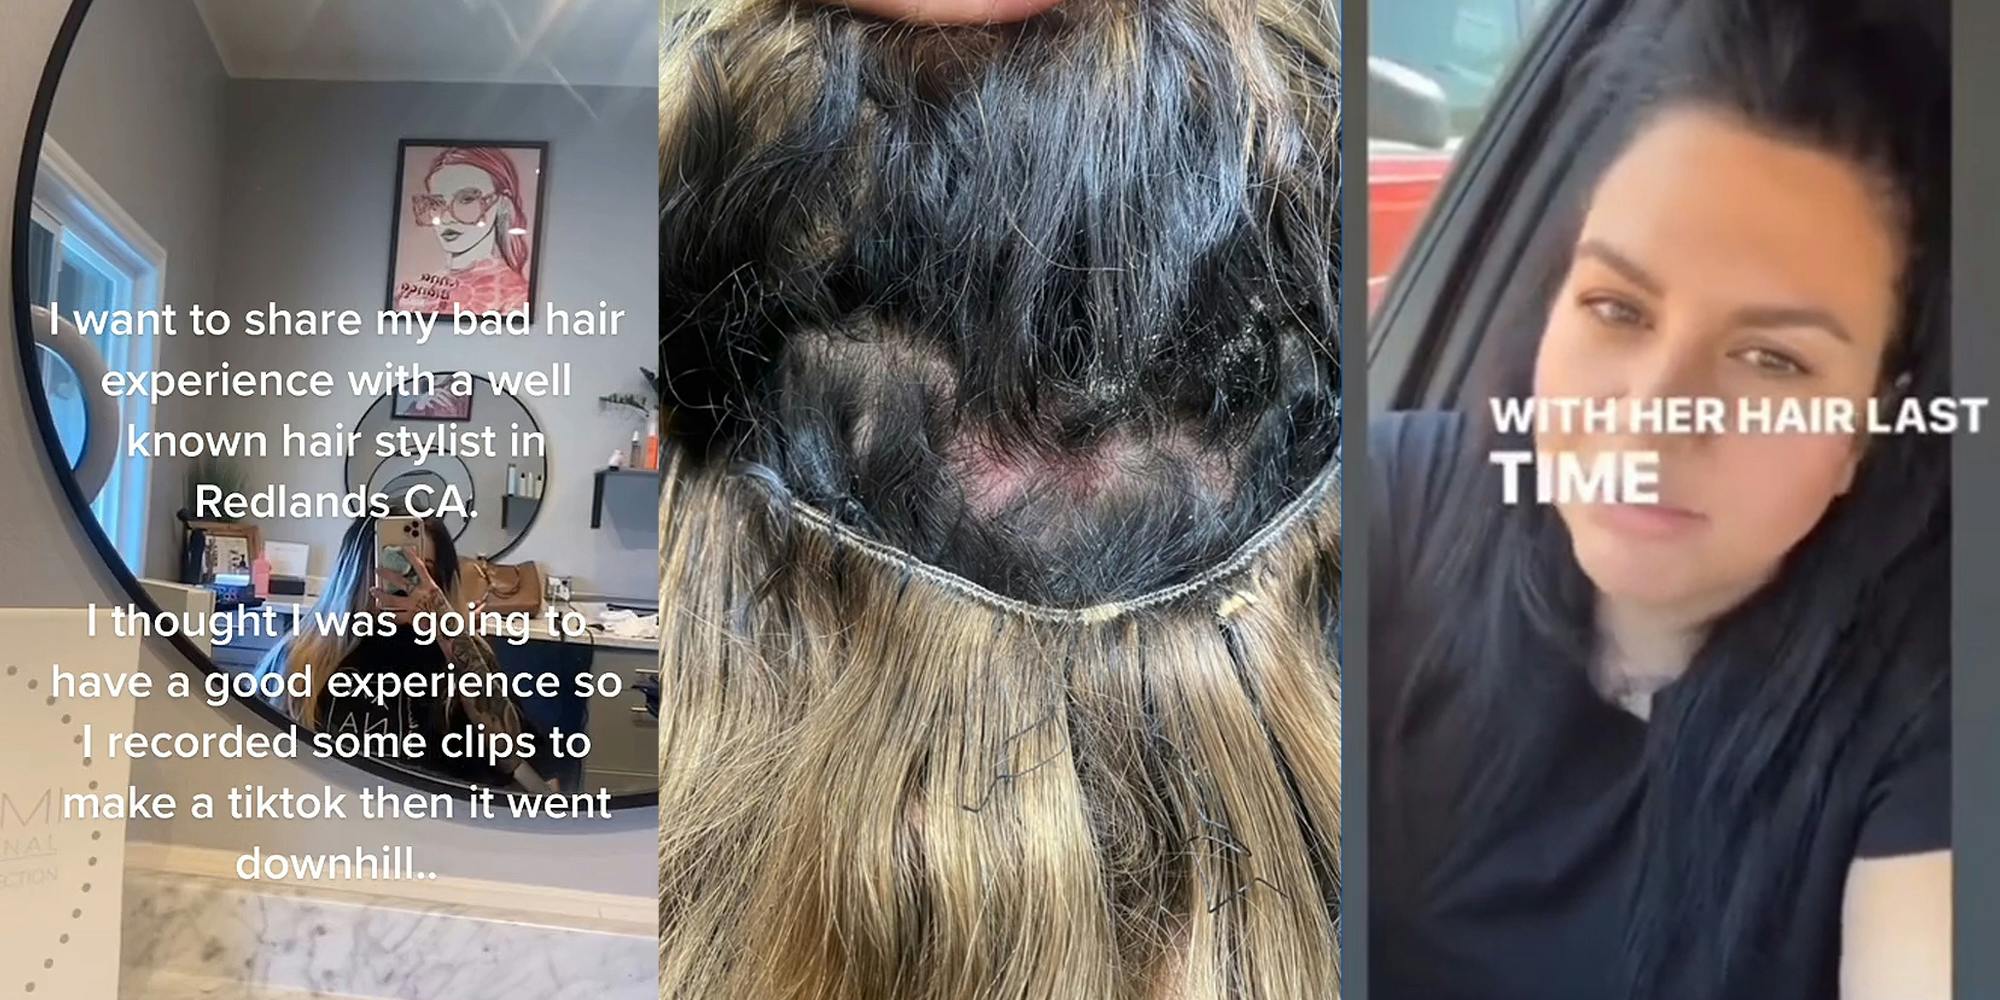 Woman Says Hairstylist Blocked Her After Her Hair Fell Out